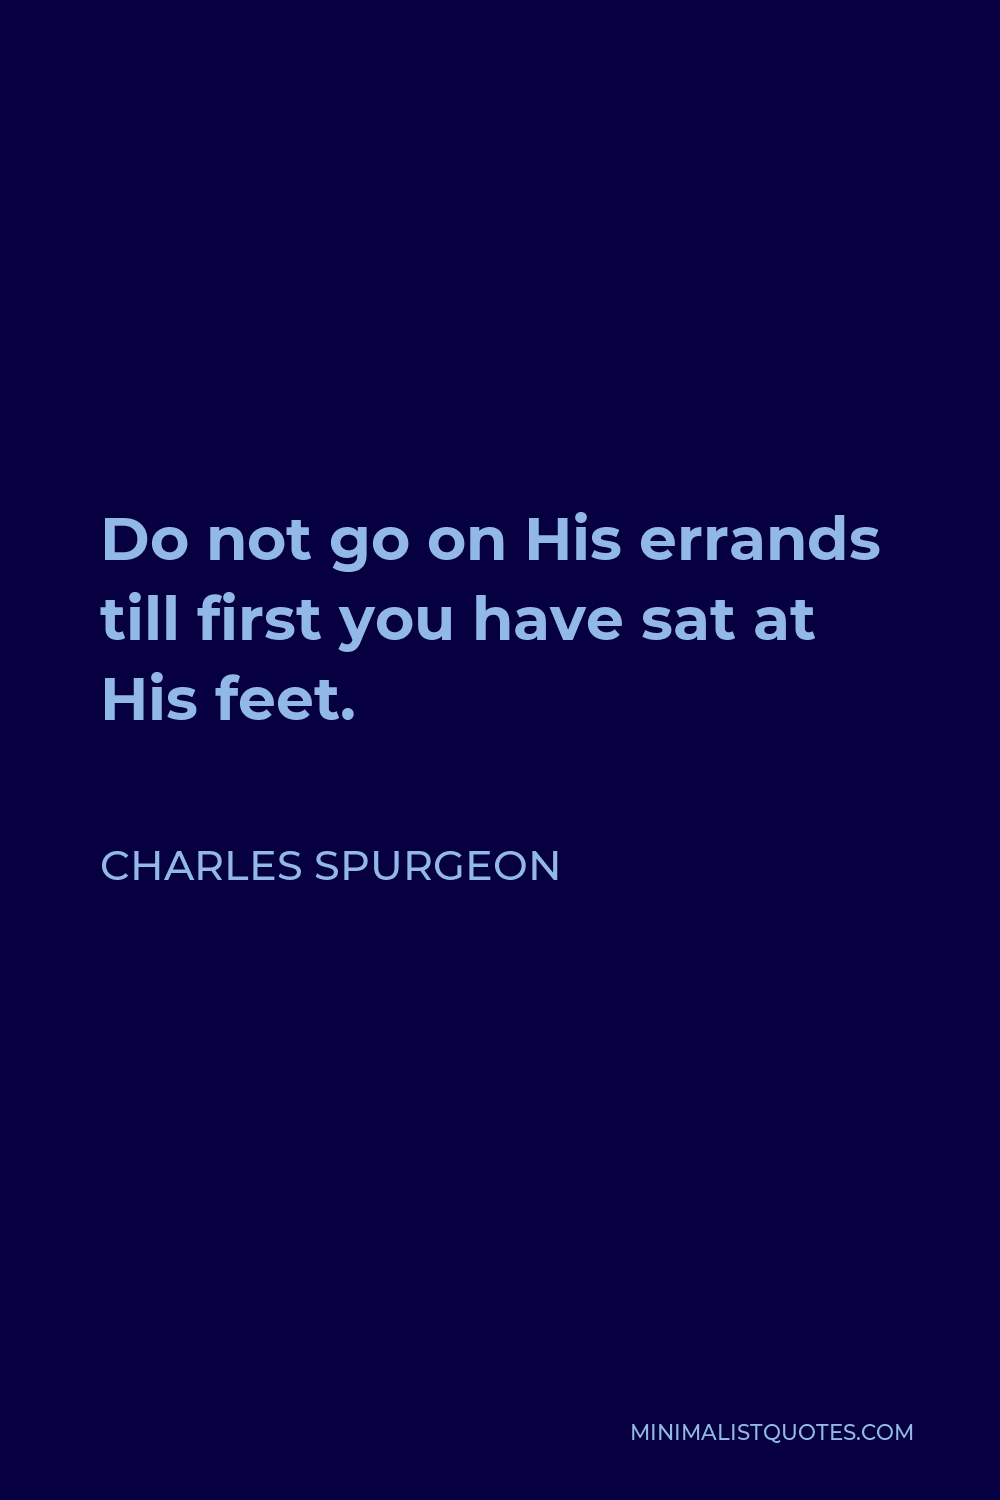 Charles Spurgeon Quote - Do not go on His errands till first you have sat at His feet.